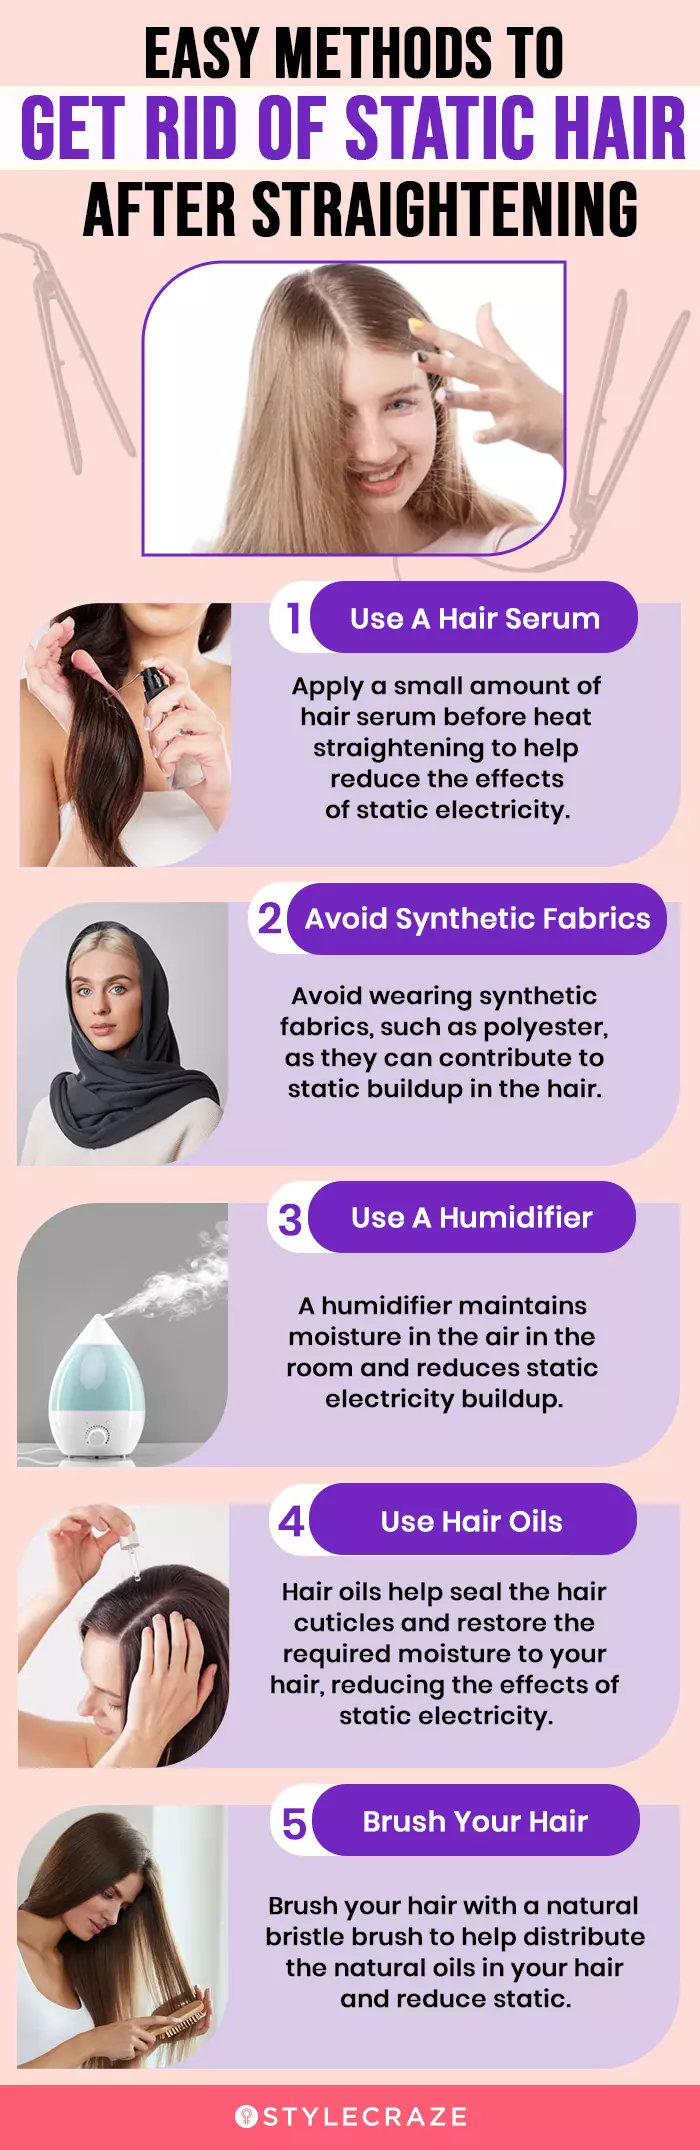 easy methods to get rid of static hair after straightning (infographic)